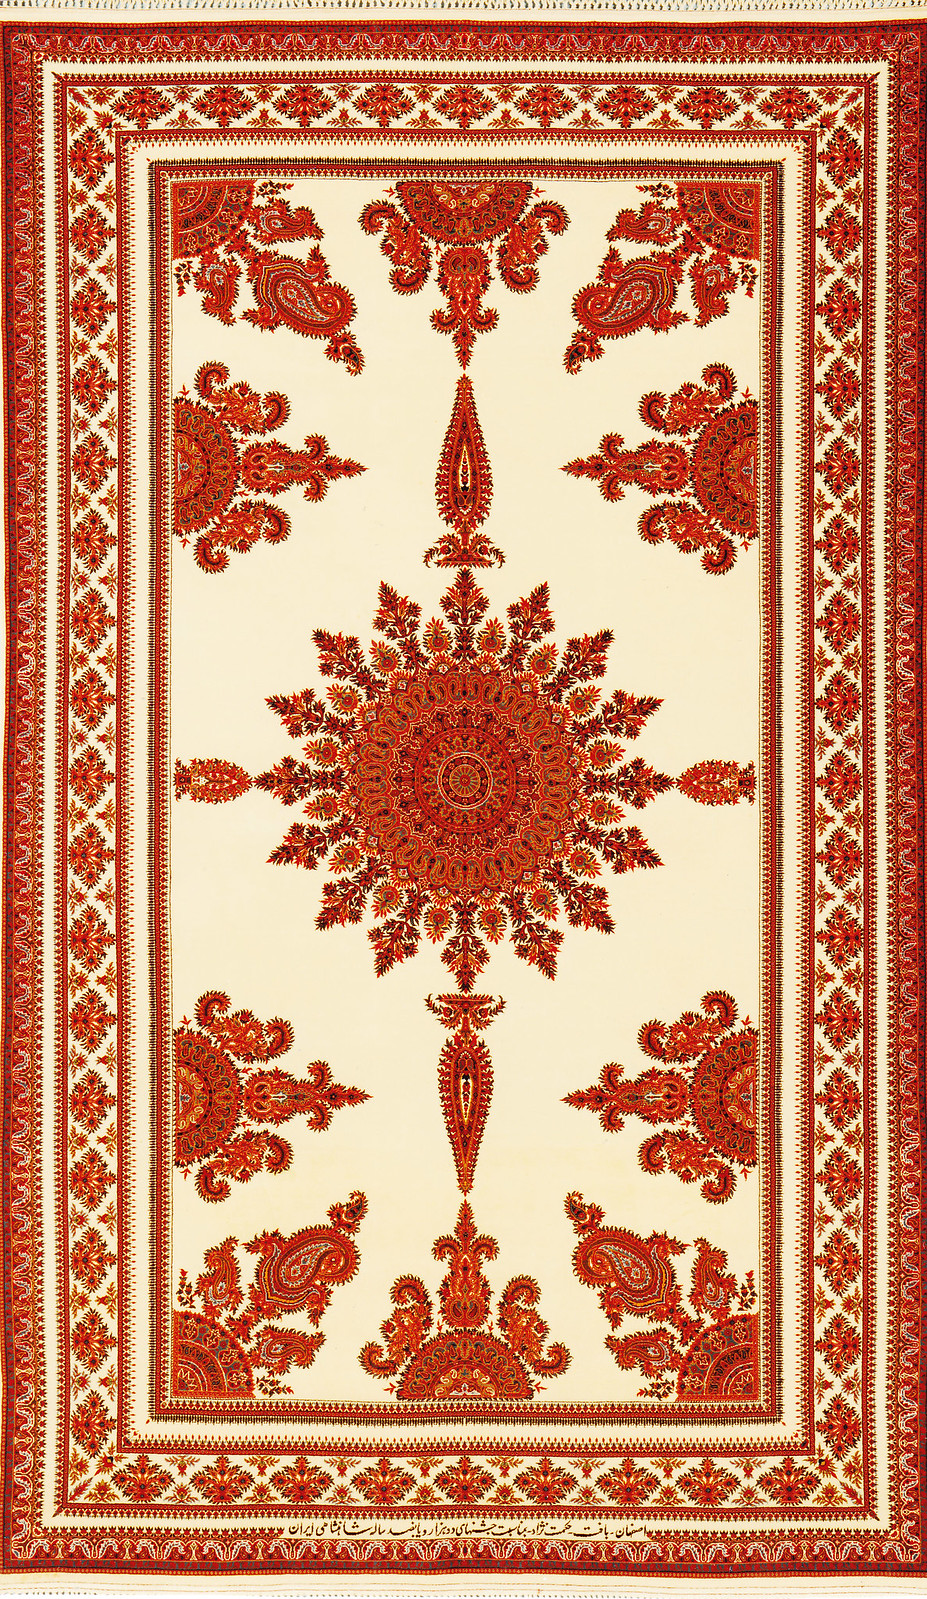 Hekmat Nejad Isfahan Persian Rug by the Order of Shah for 2500 years of Monarchy of Persian Empire